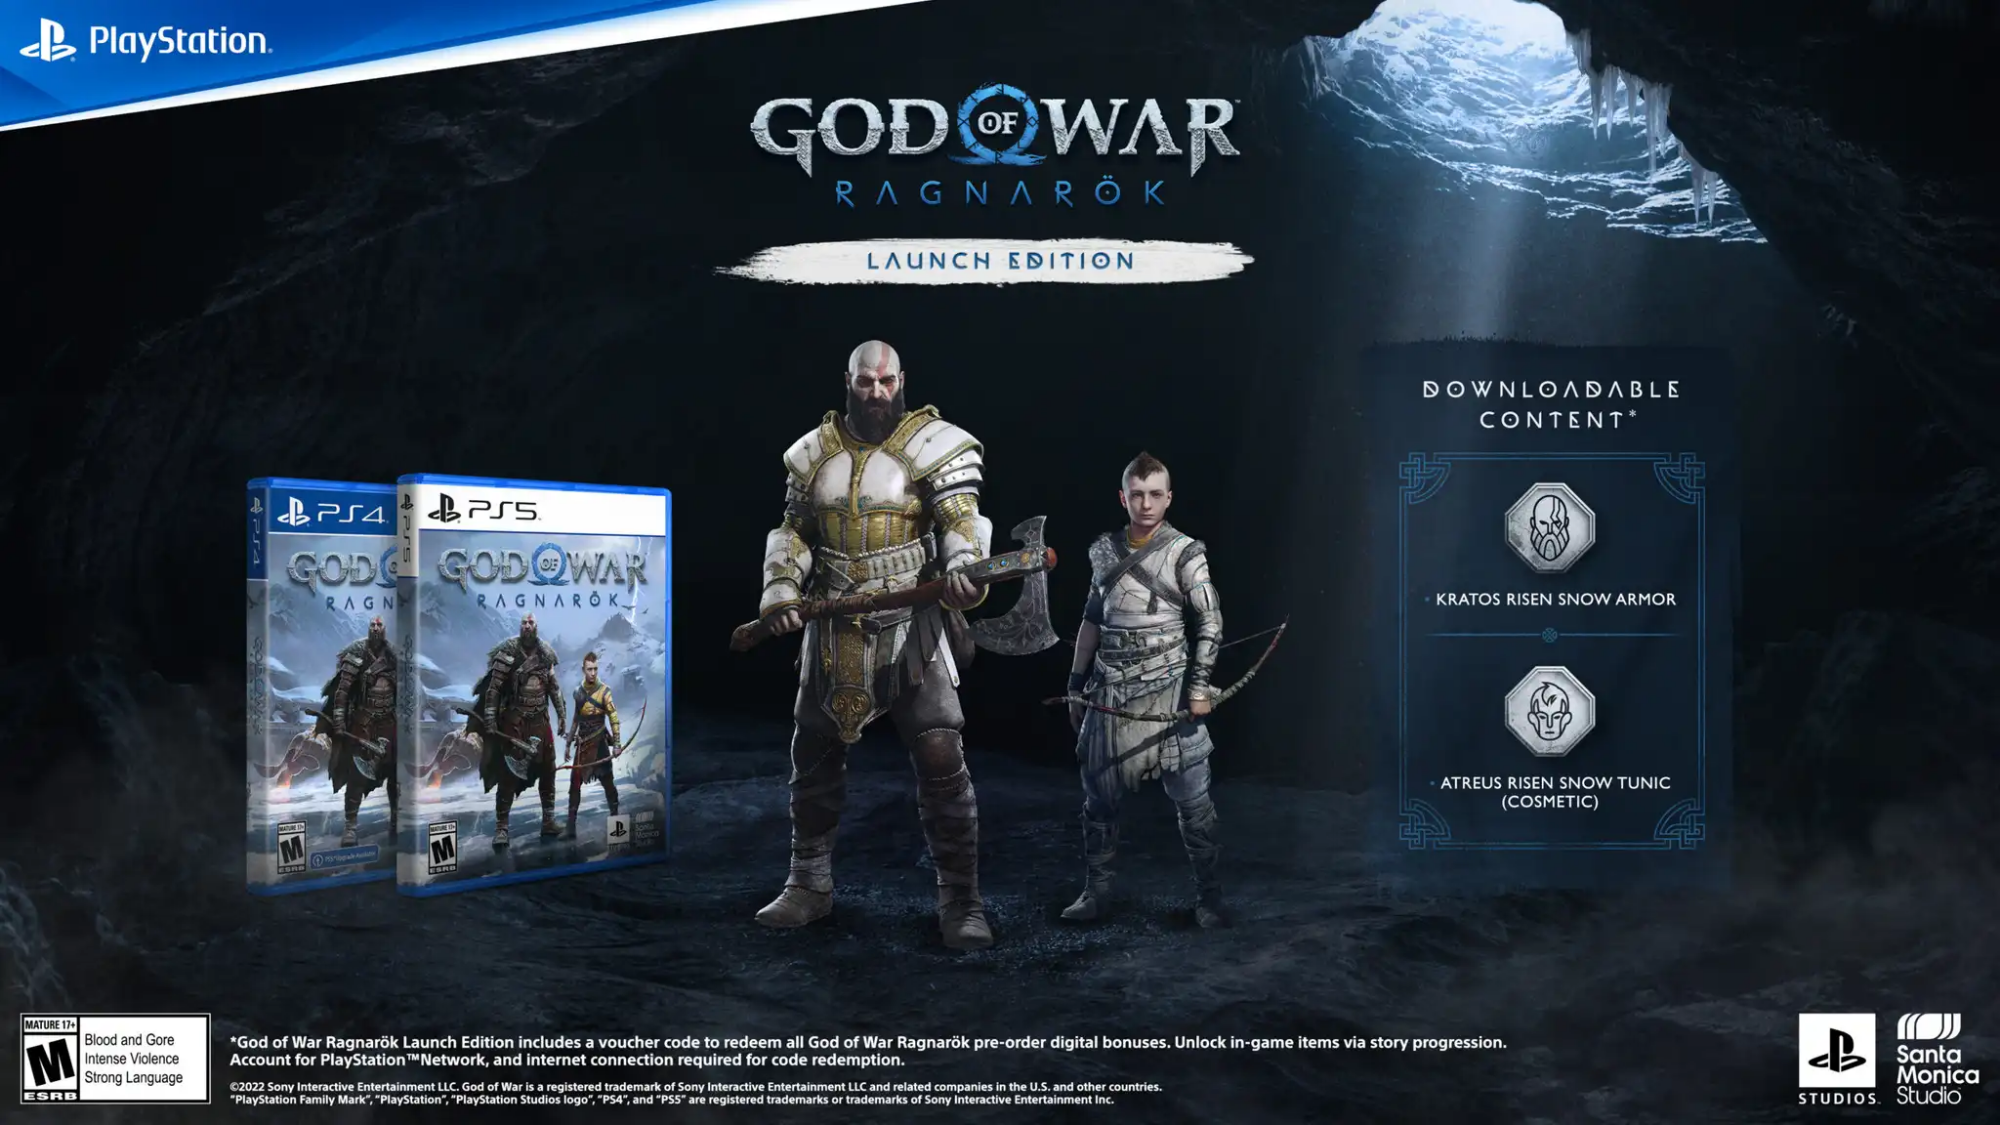 a preview of the bonus cosmetics included with "god of war ragnarok" launch edition